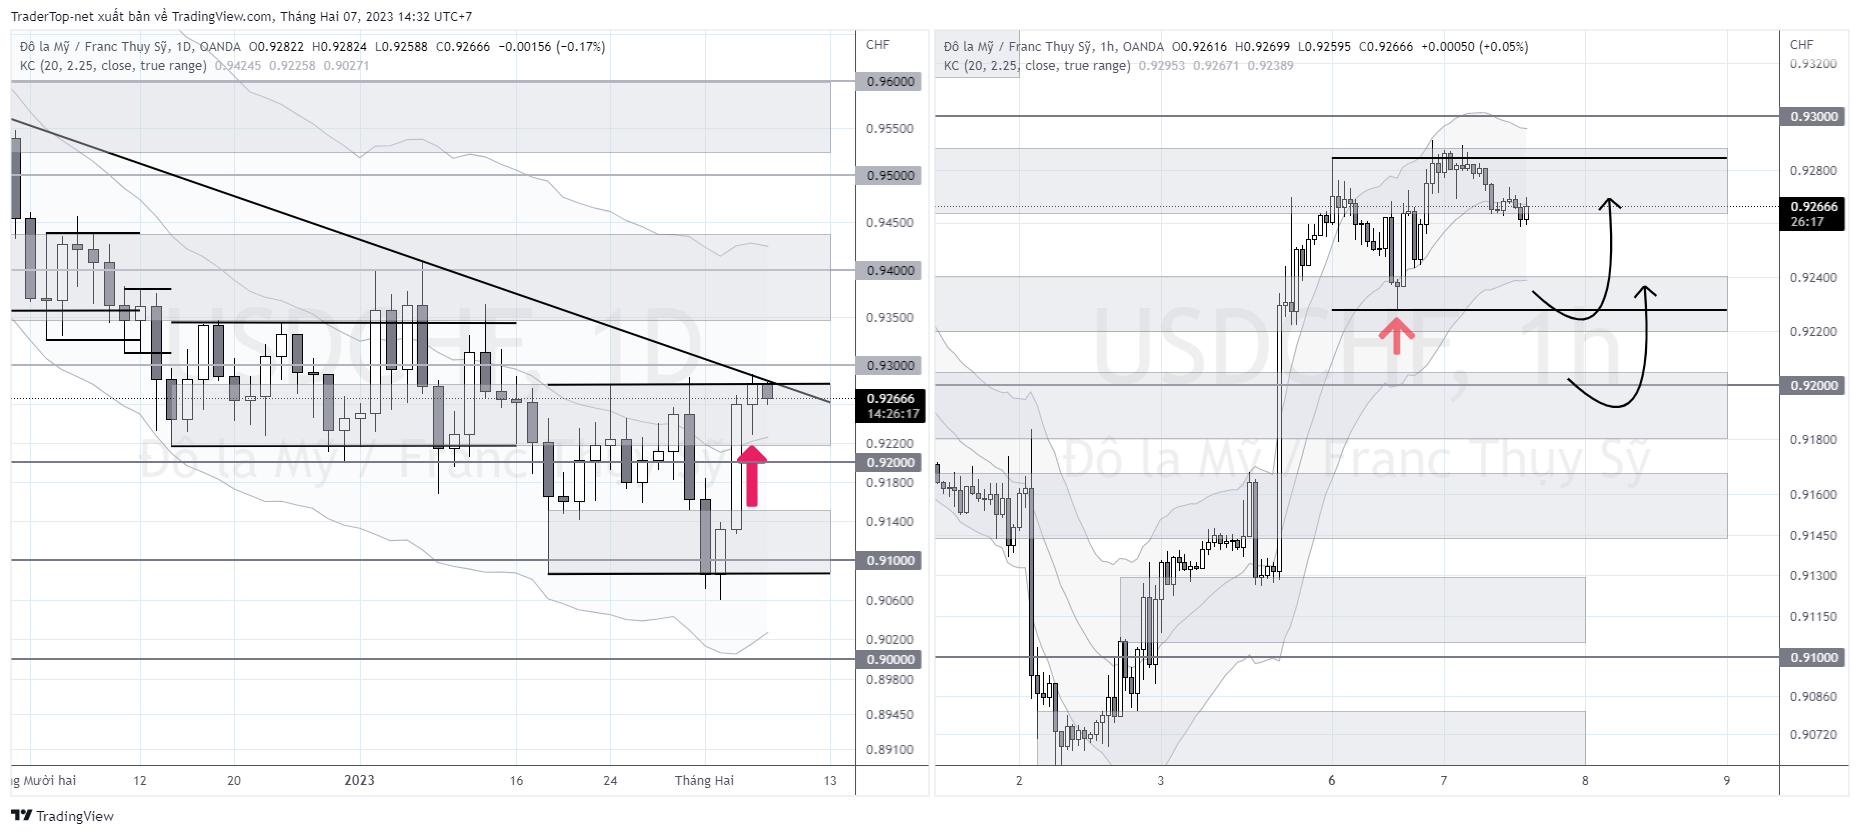 USDCHF_2023-02-07_14-32-51.png